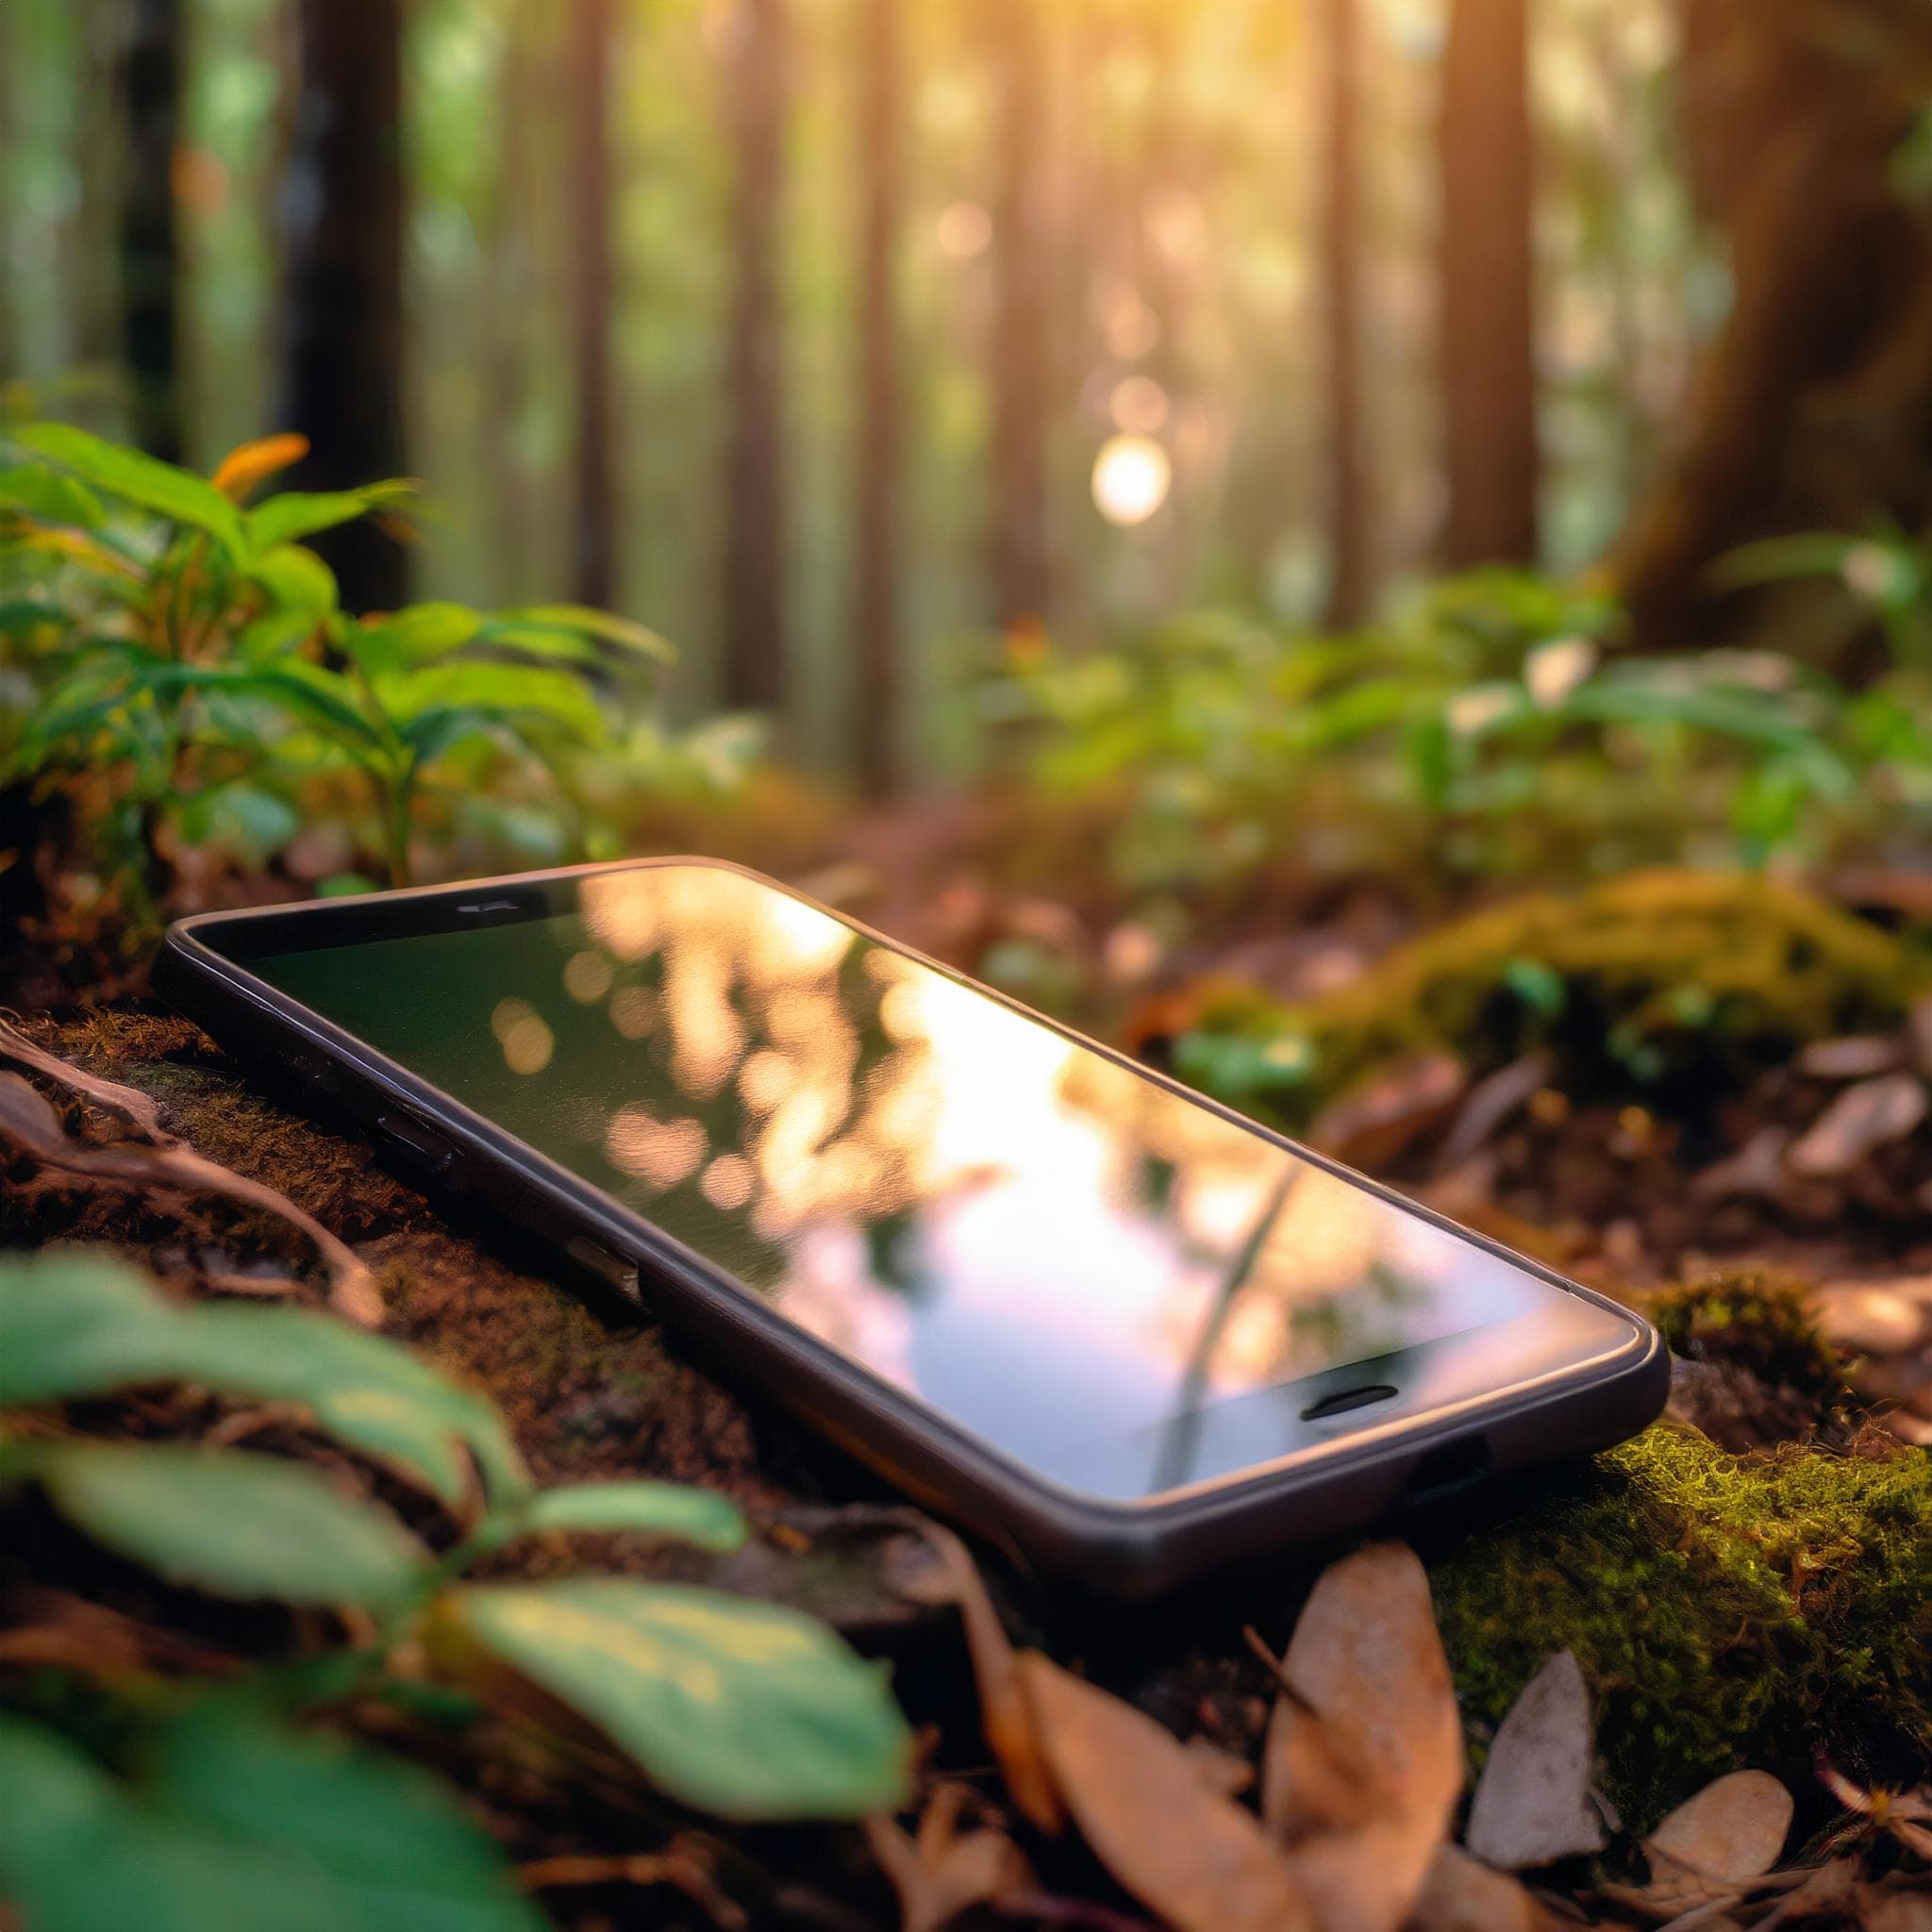 A smartphone lies in the forest.